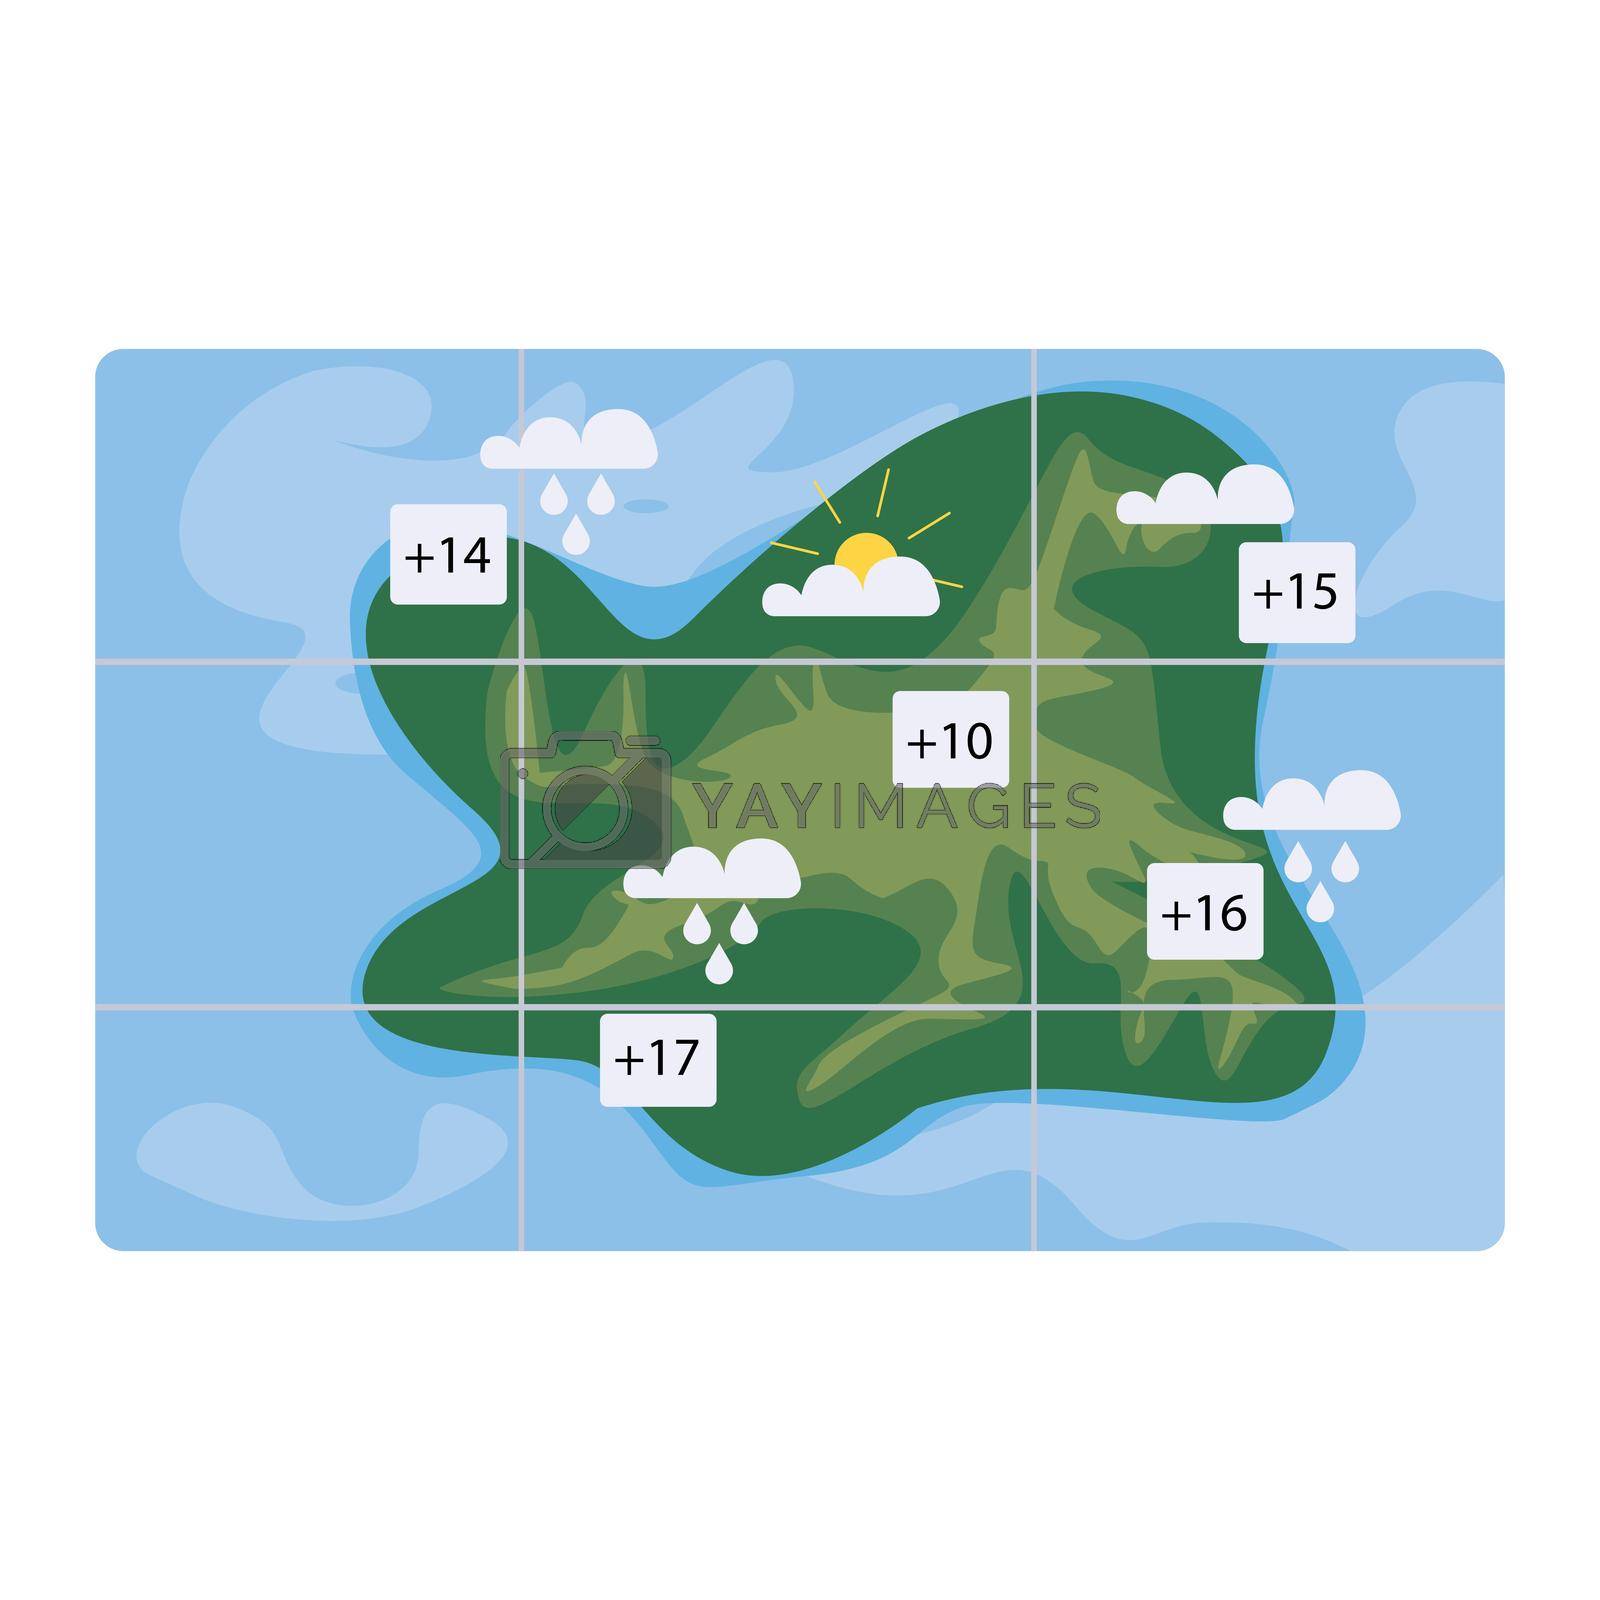 Weather forecast map semi flat color vector object. Full sized item on white. Television channel. Daily forecast prediction. Simple cartoon style illustration for web graphic design and animation